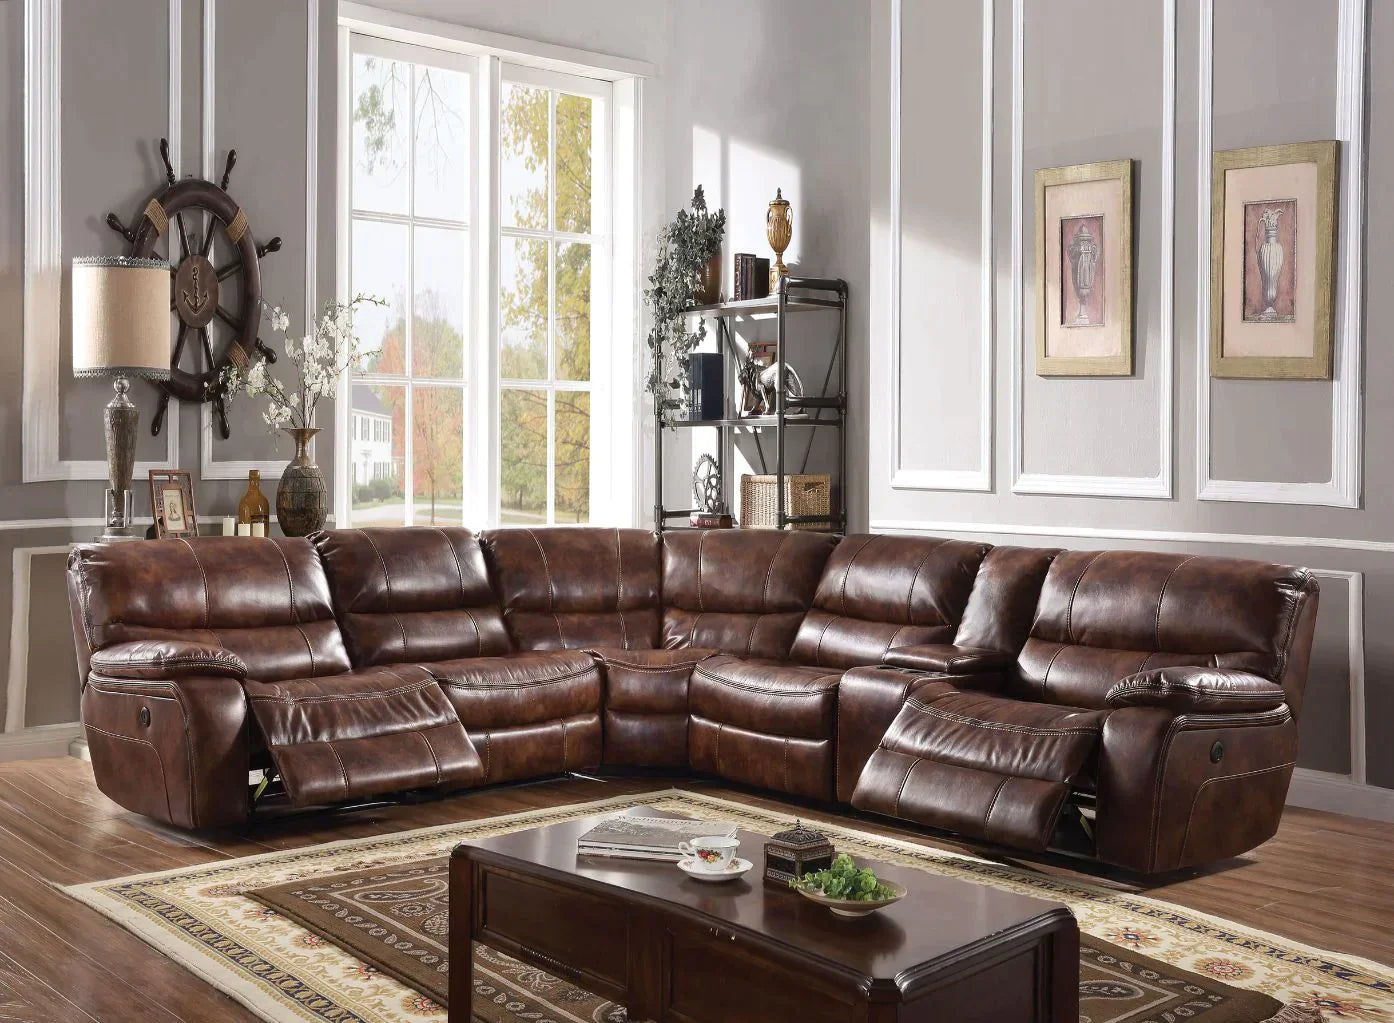 Brax 2-Tone Brown Leather-Gel Sectional Sofa Model 52070 By ACME Furniture